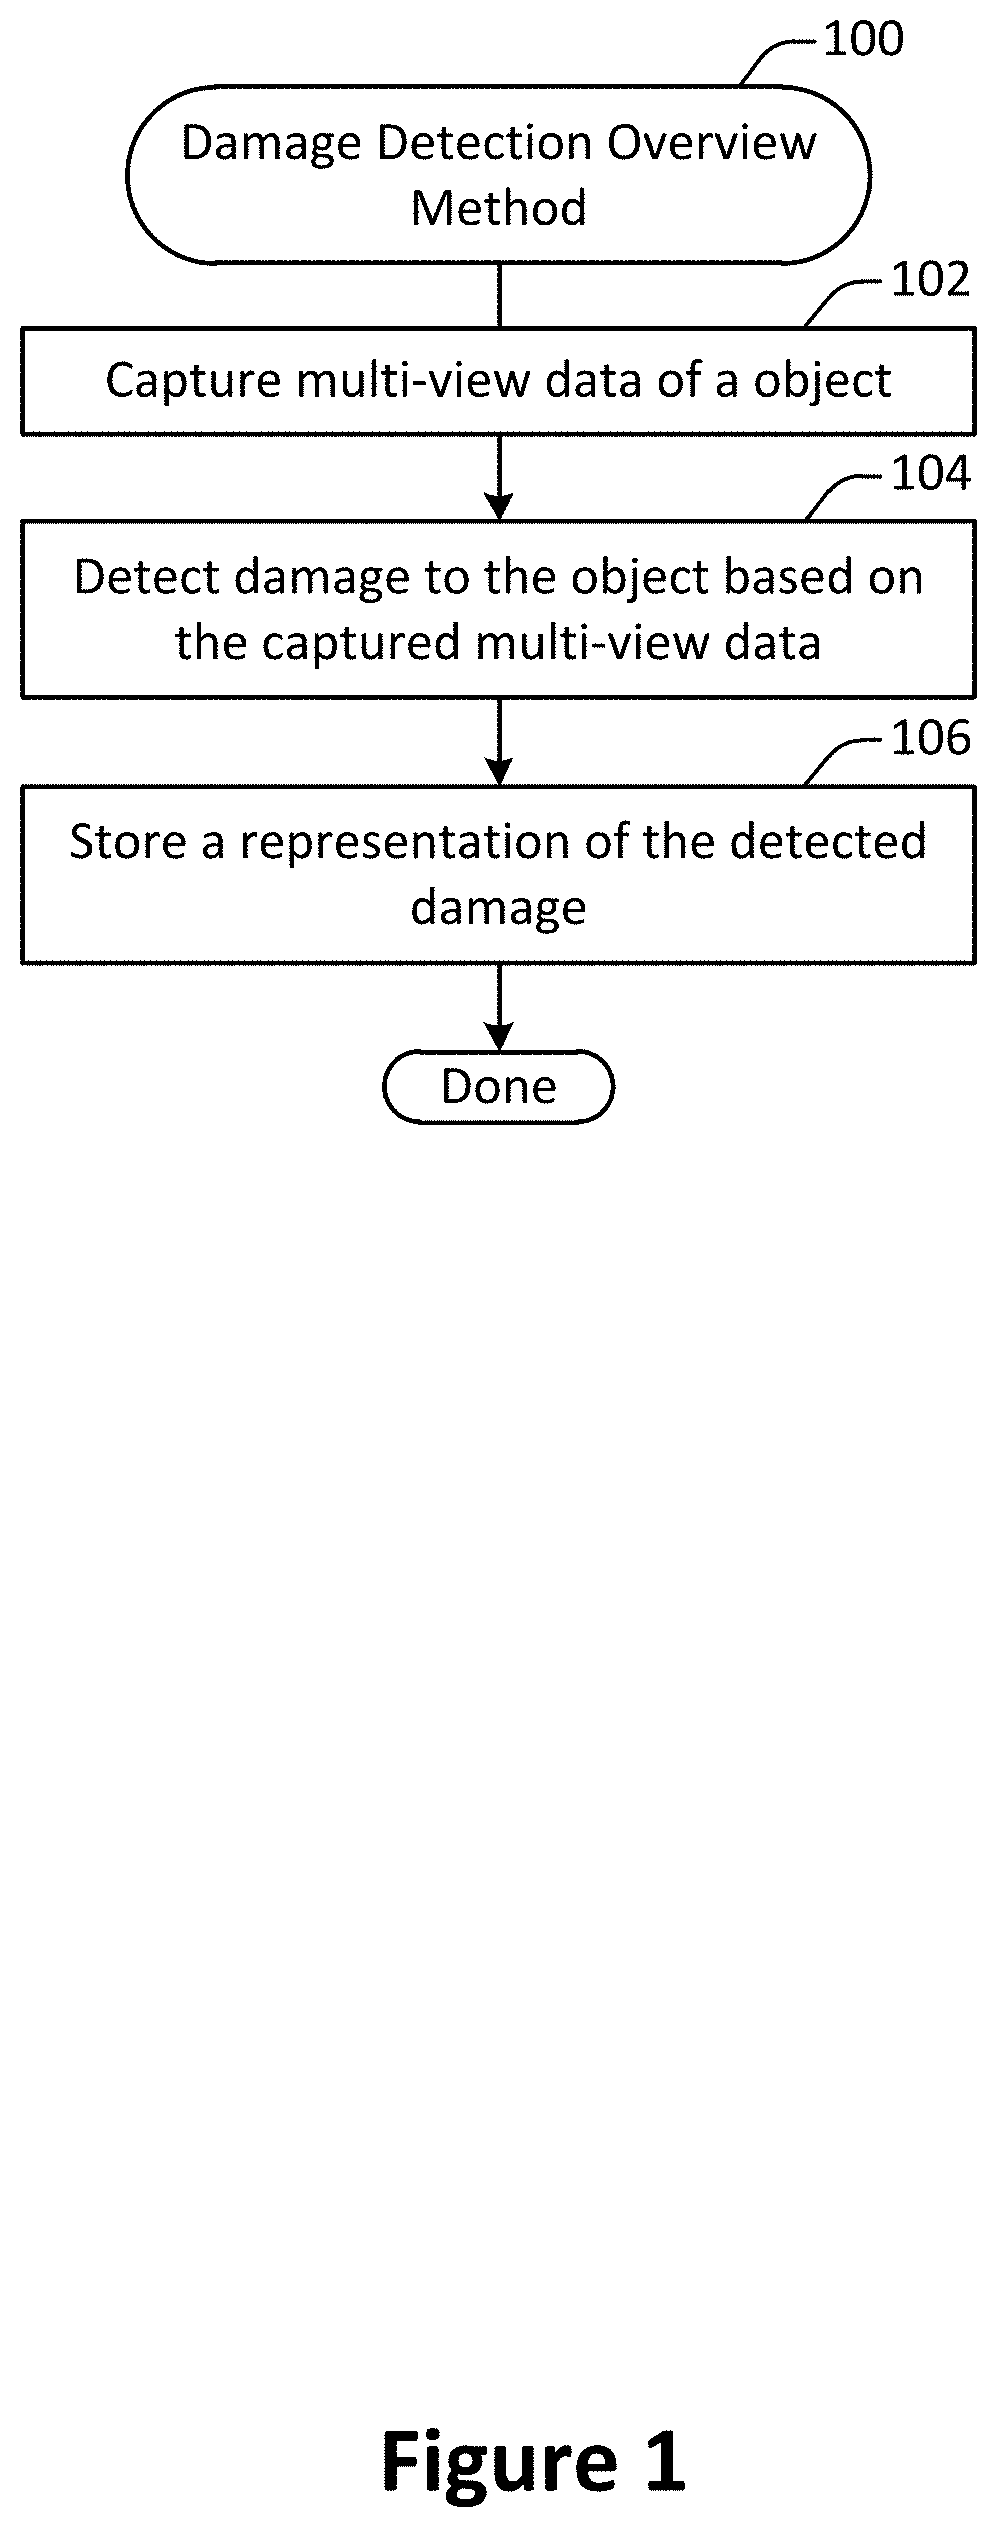 Damage detection from multi-view visual data